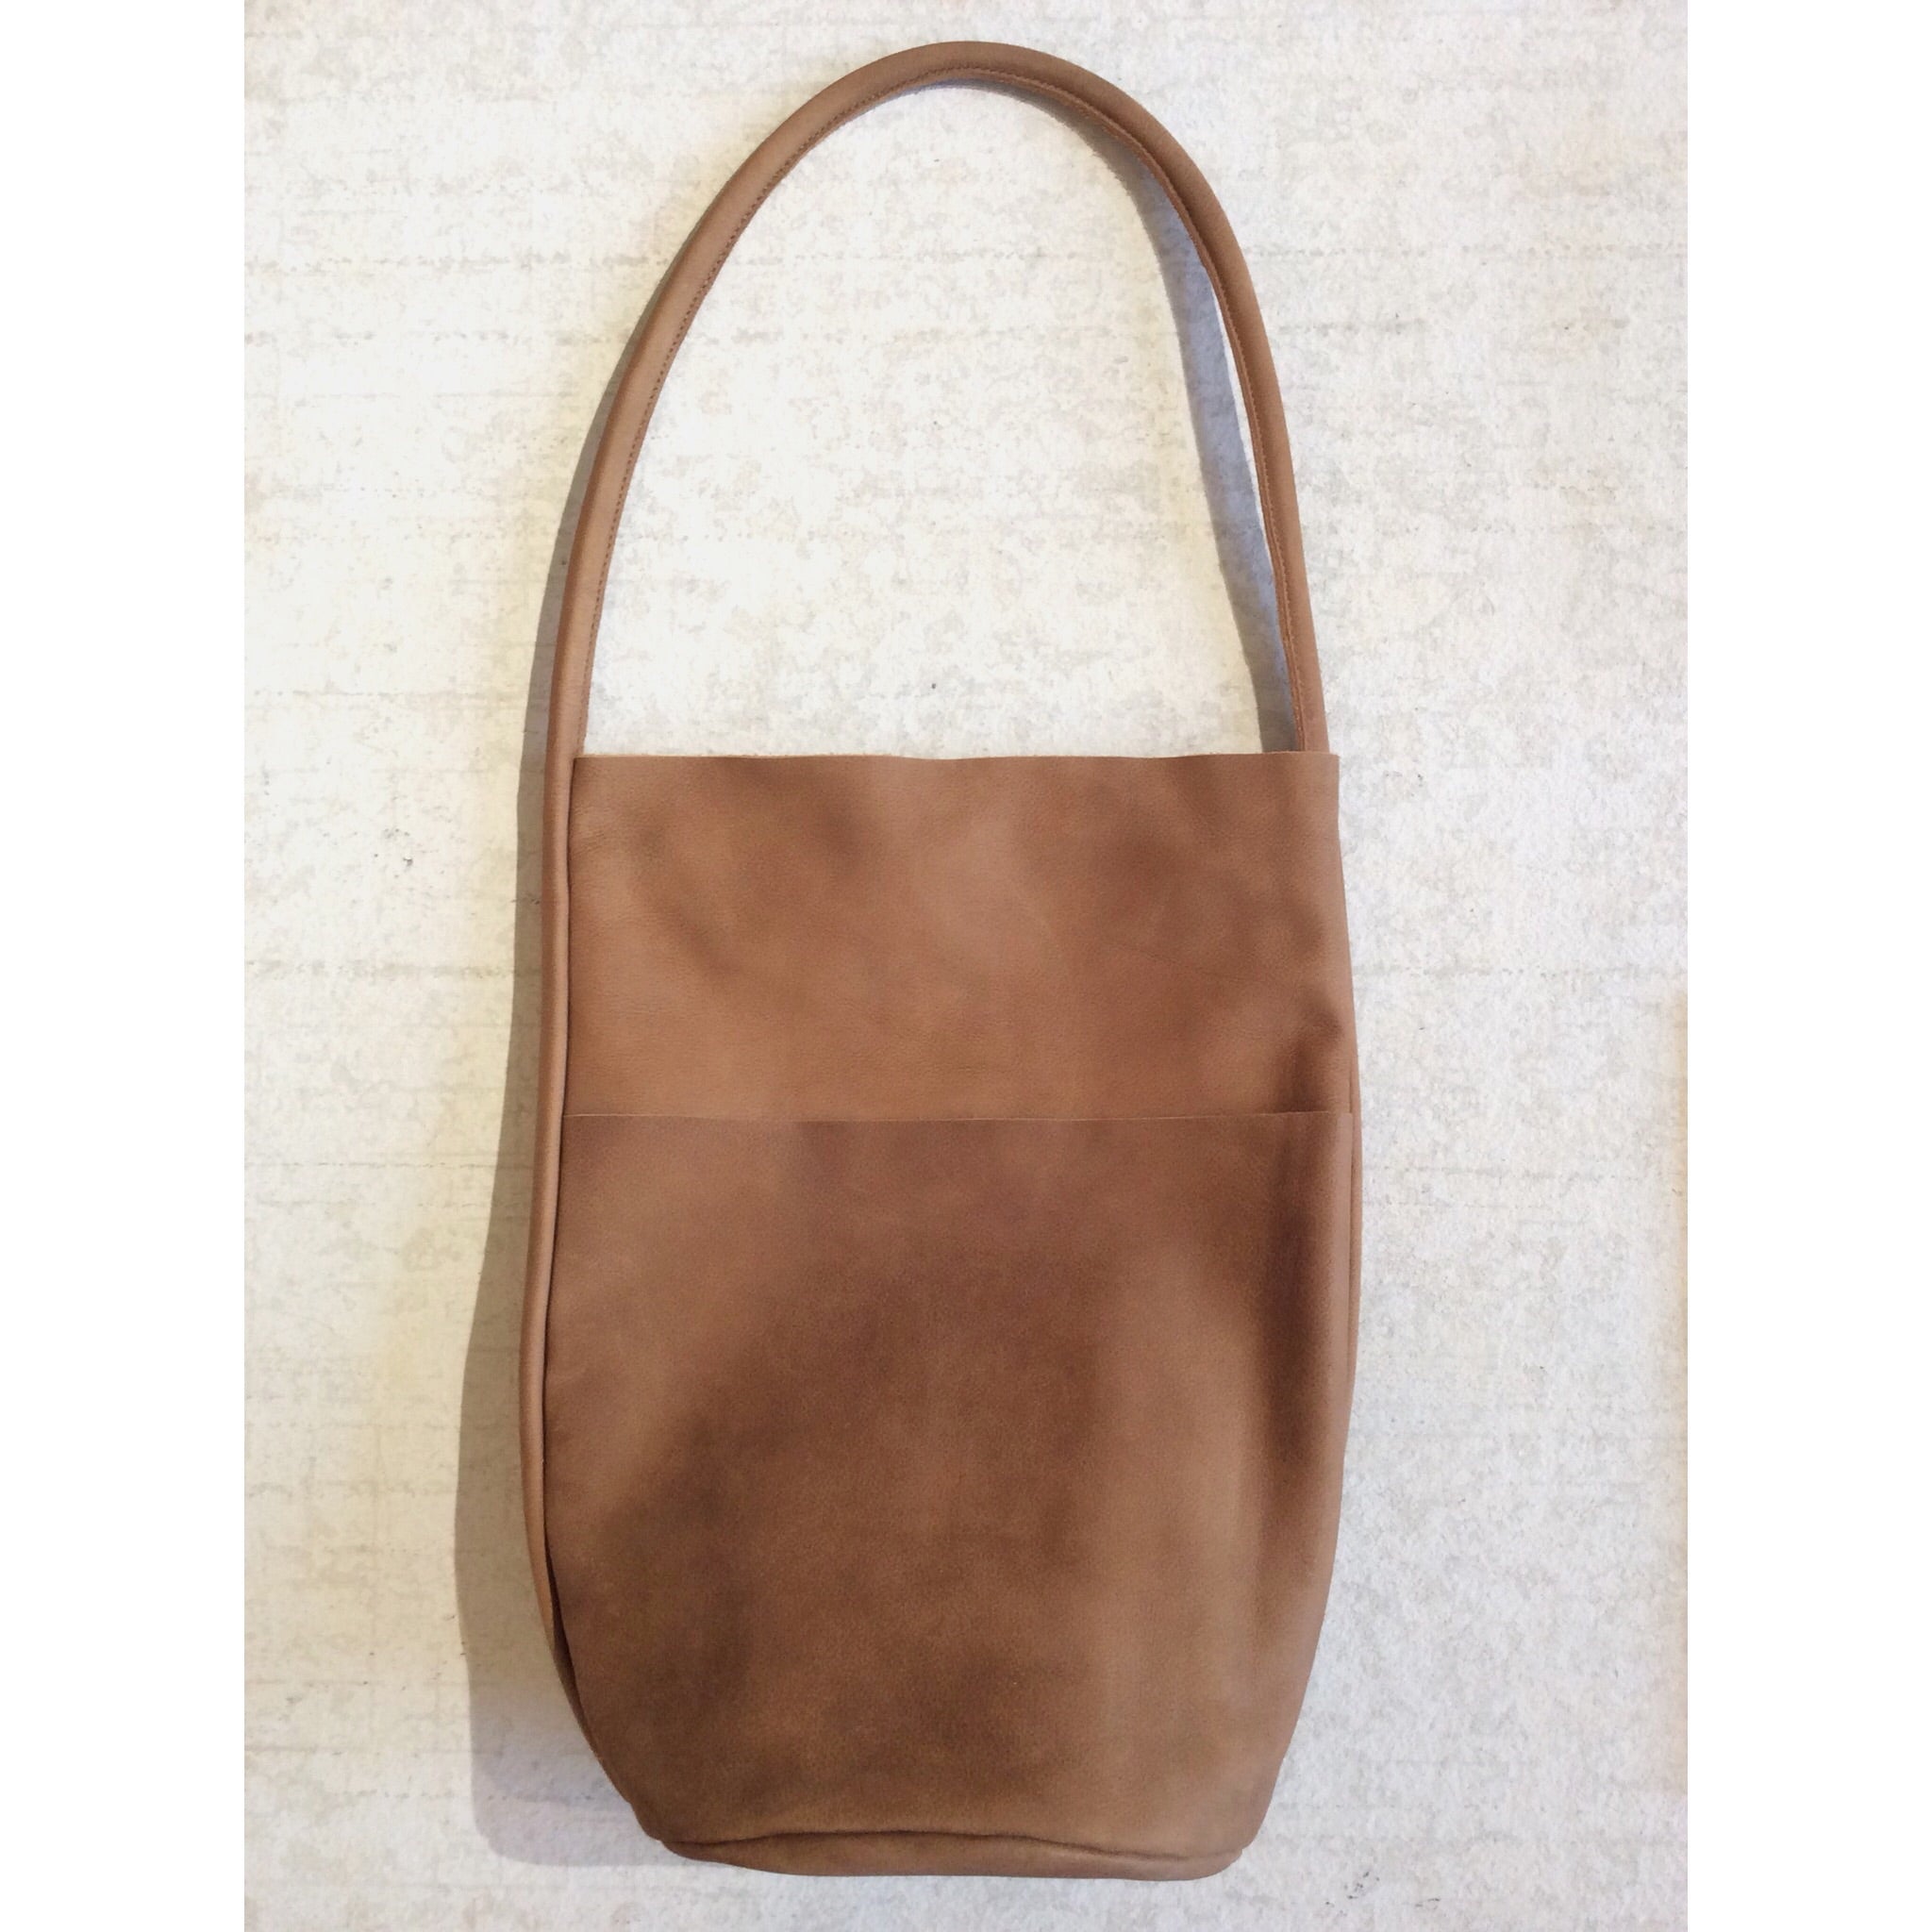 BODY SCULPTURES LEATHER SHOPPER BAG / BROWN SUEDE